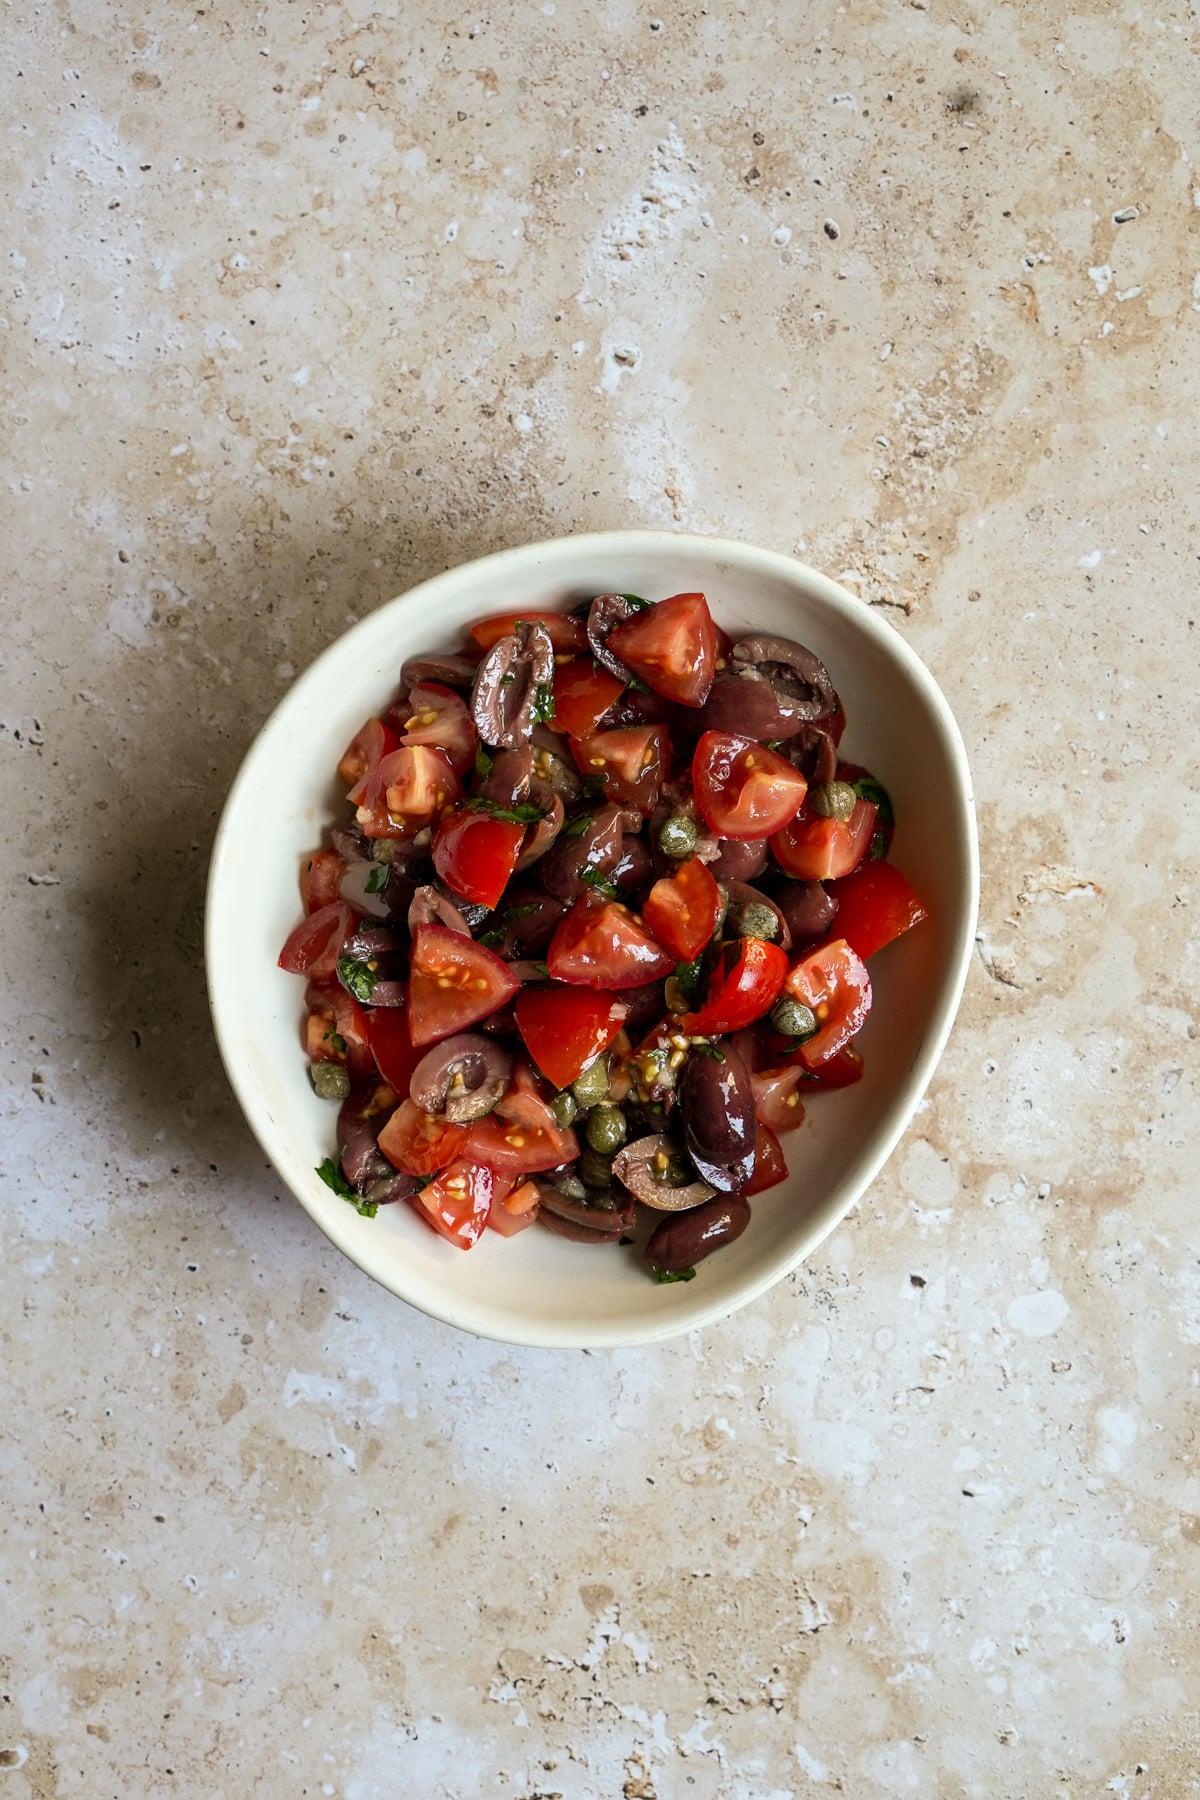 Tomatoes, olives, capers, garlic and parsley in a bowl